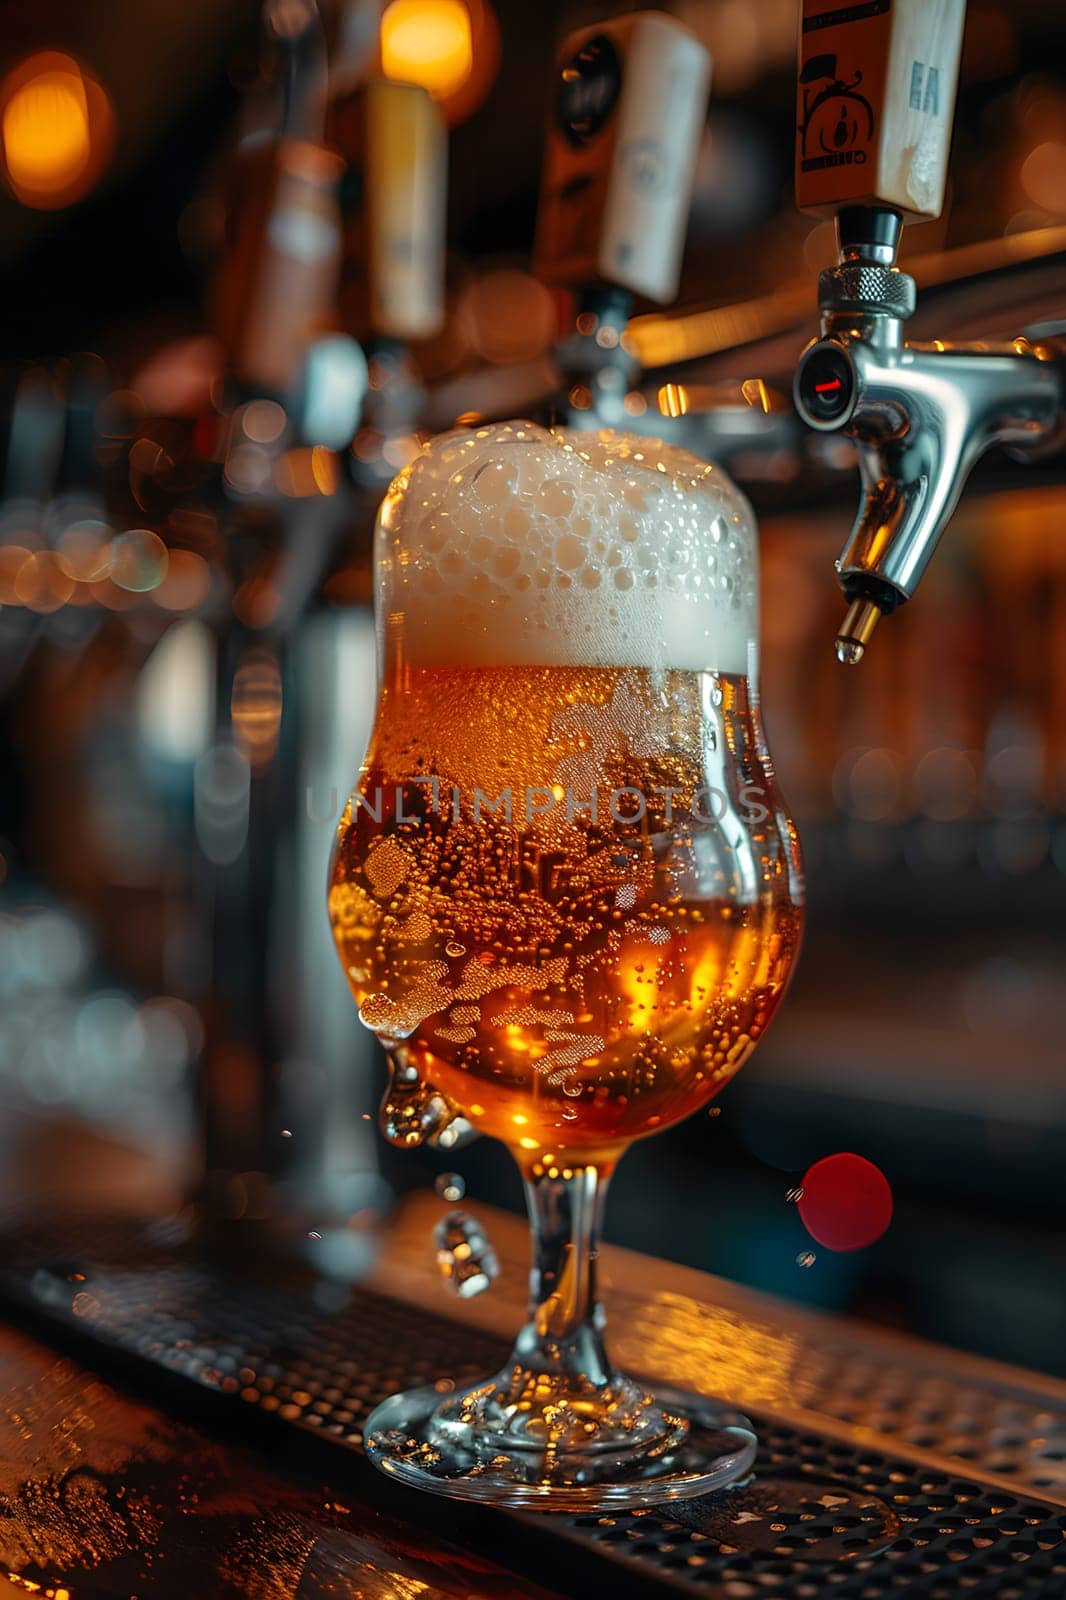 A glass of beer is being poured from a tap at a bar, filling up the beer glass with the refreshing liquid